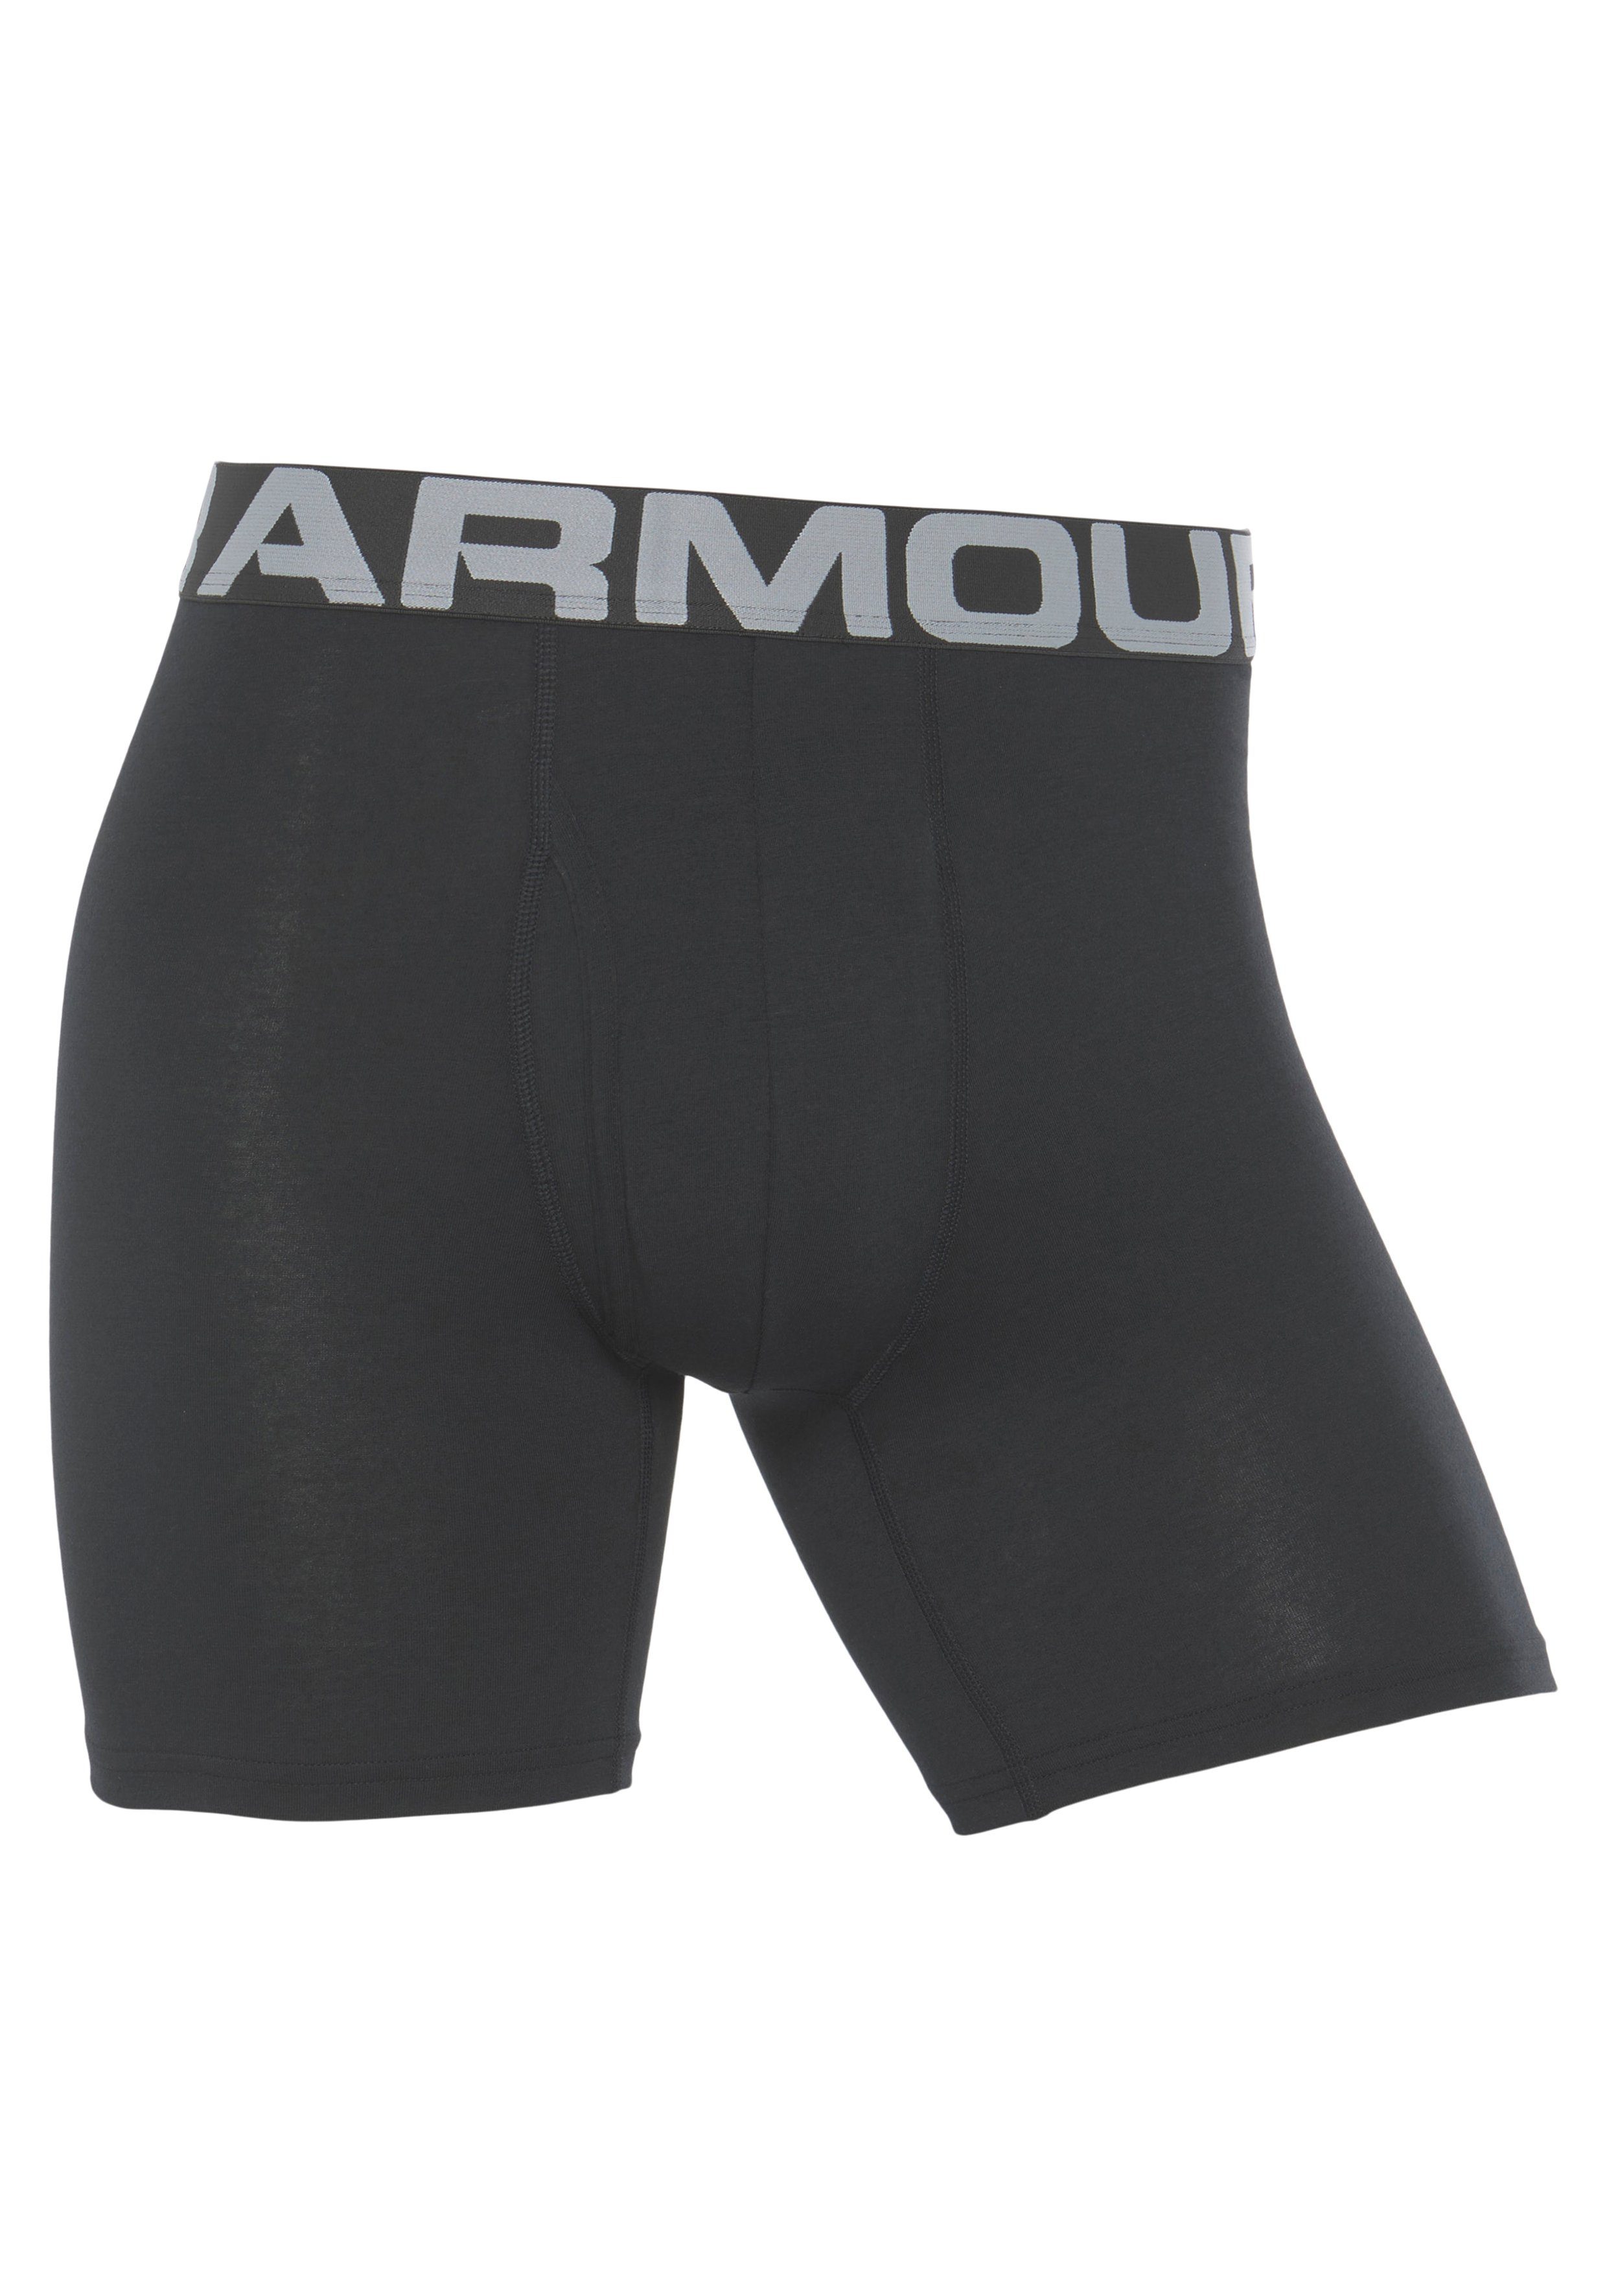 Armour® CHARGED in 6 3er-Pack) 1 schwarz PACK Under 3-St., (Packung, COTTON Boxershorts